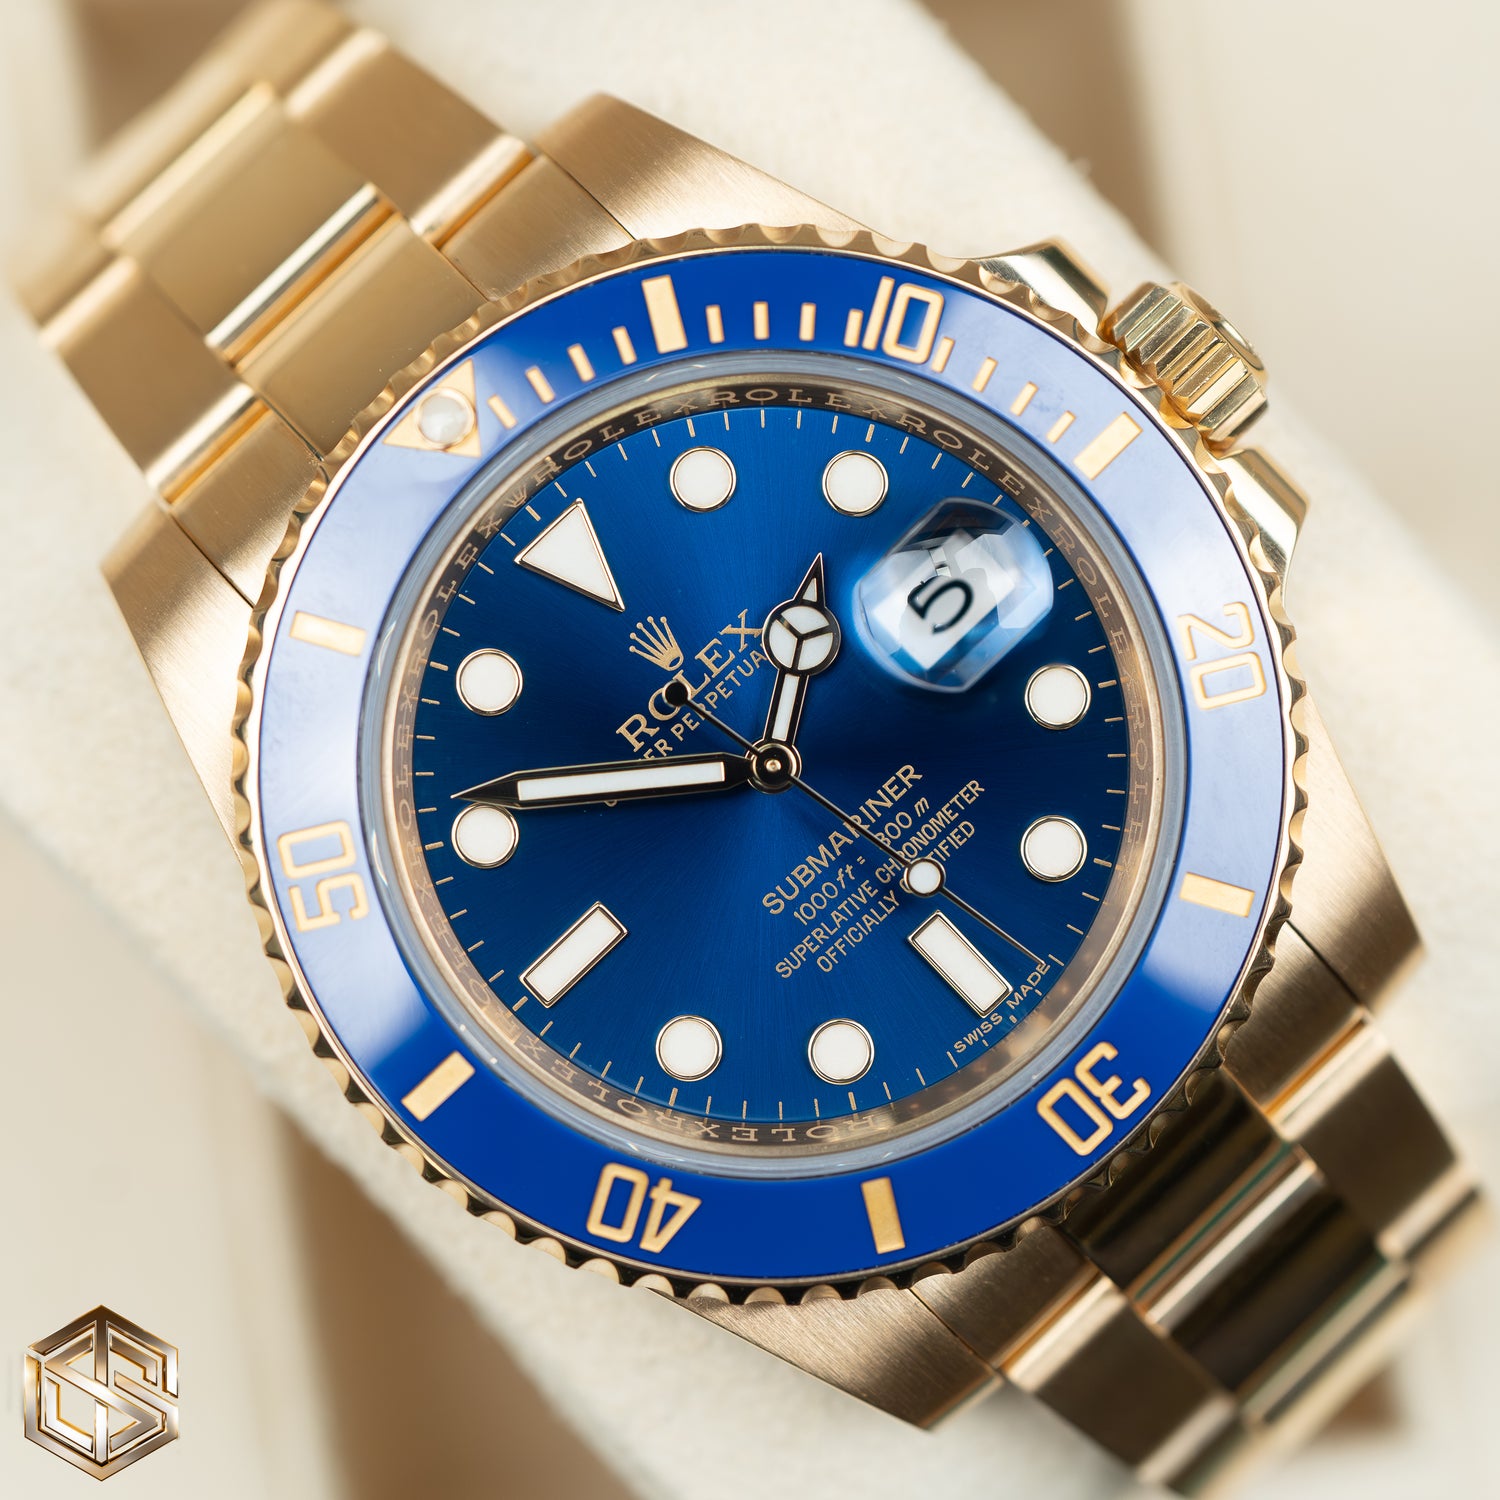 Rolex 116618LB Submariner Date 18ct Yellow Gold Blue Dial 2016 Watch